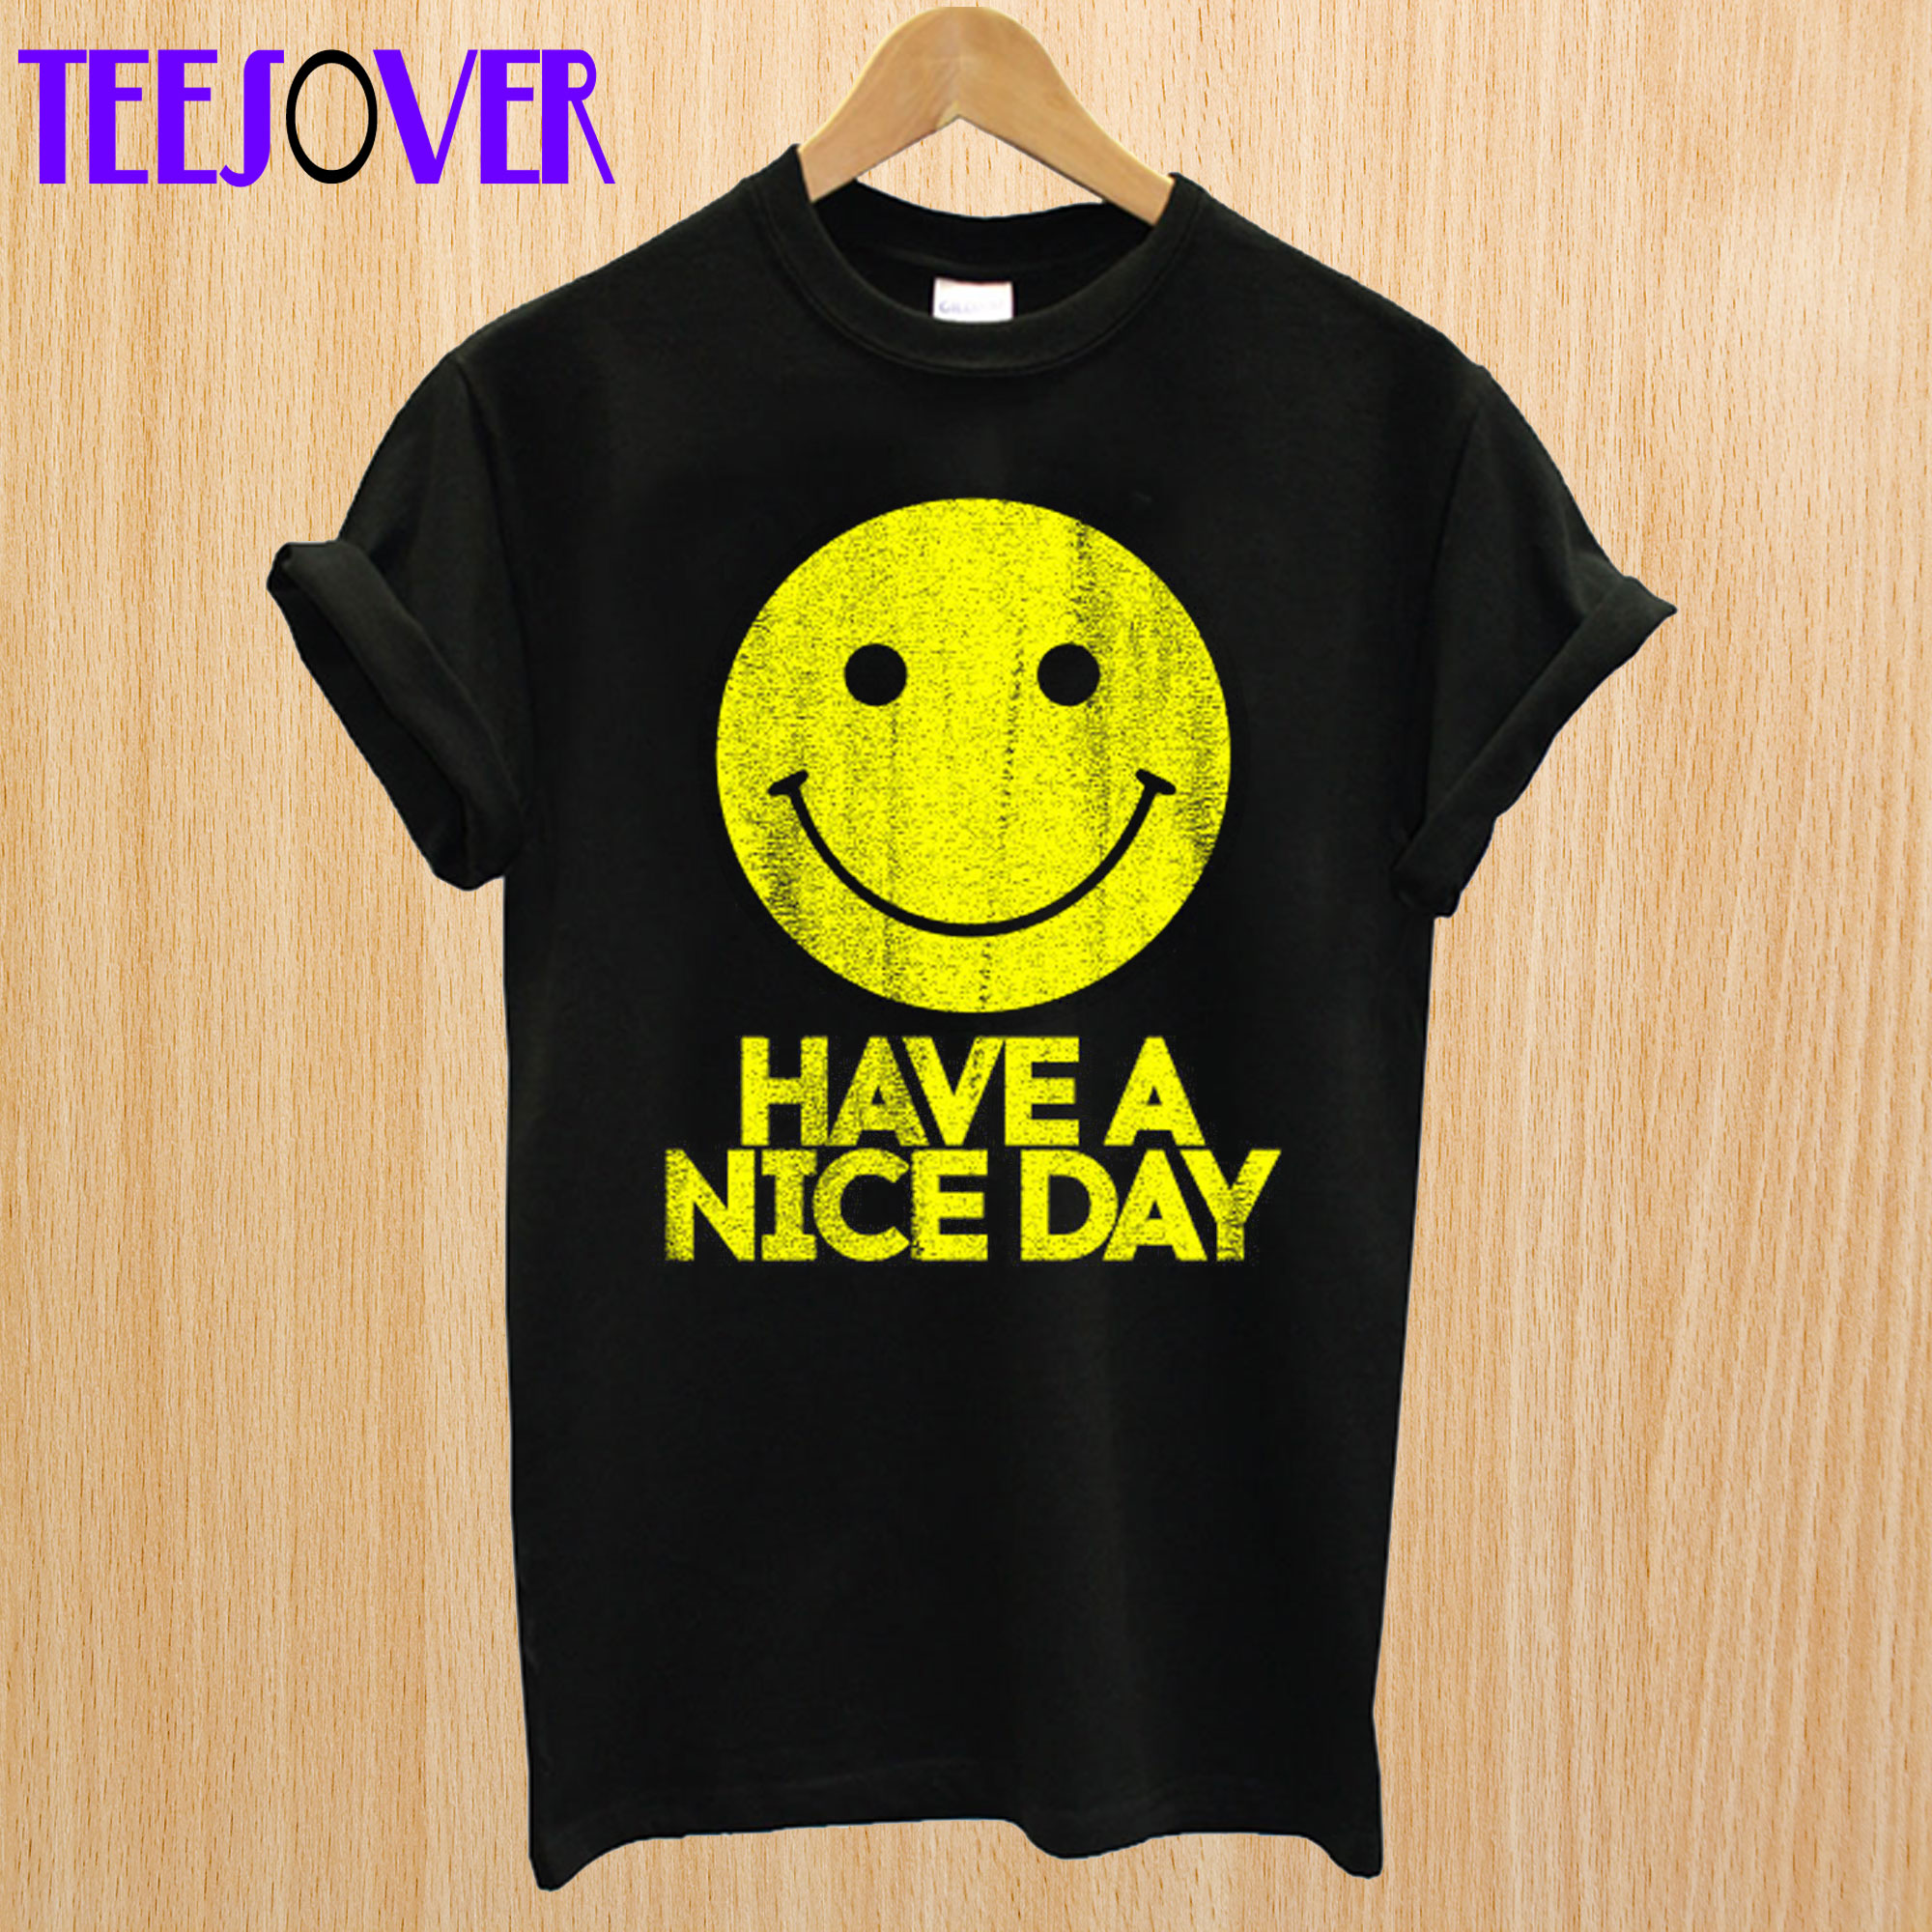 have a nice day t shirt